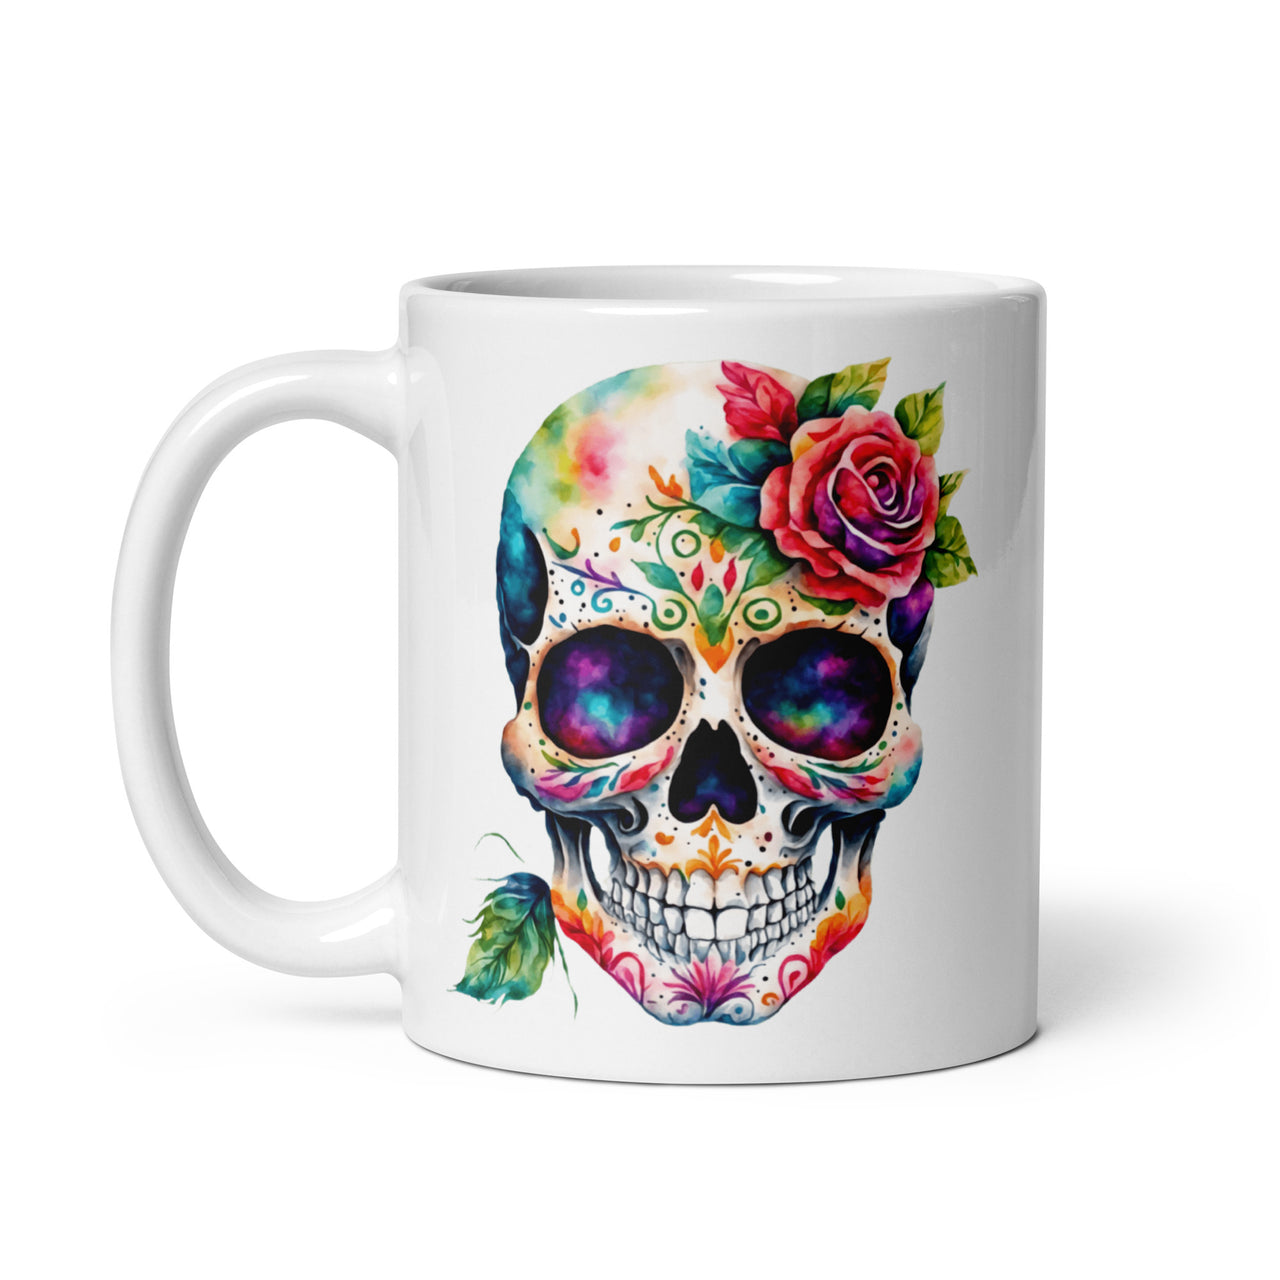 Sugar Skull Day Of The Dead Novelty Gothic Gift Coffee Cup Mug -White